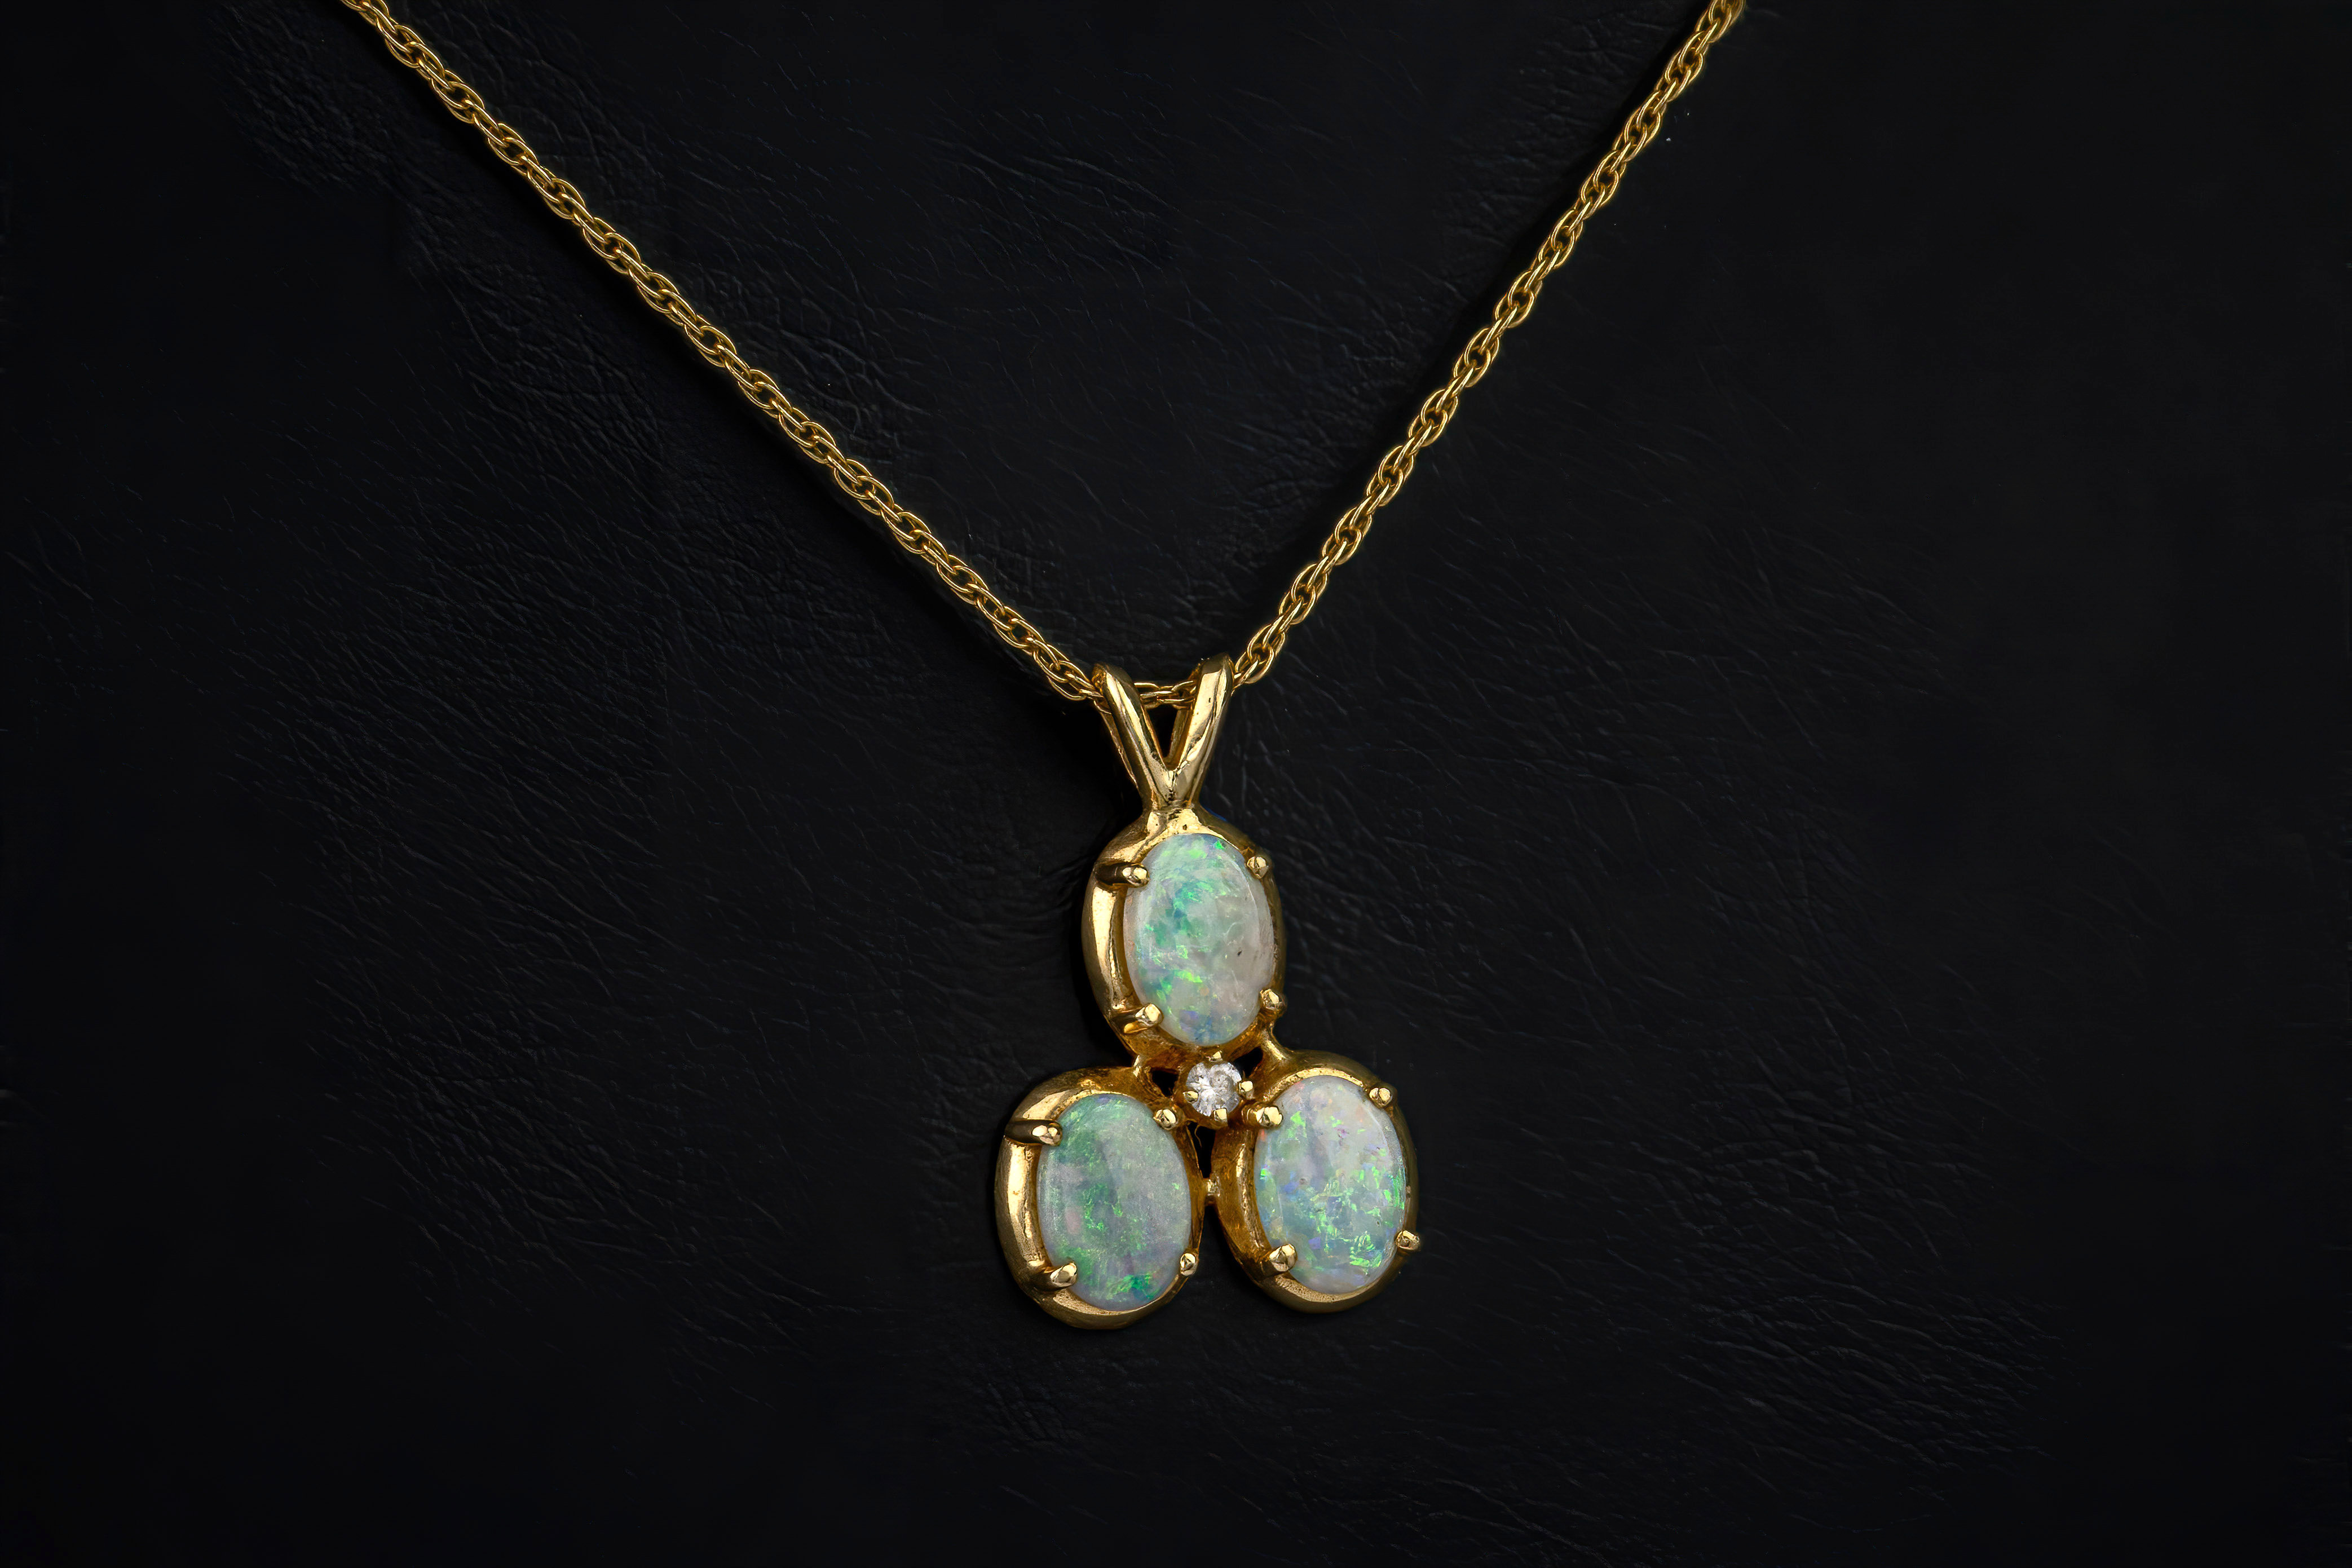 A 14ct gold, opal and diamond pendant necklace, featuring three oval opals set around a smaller,